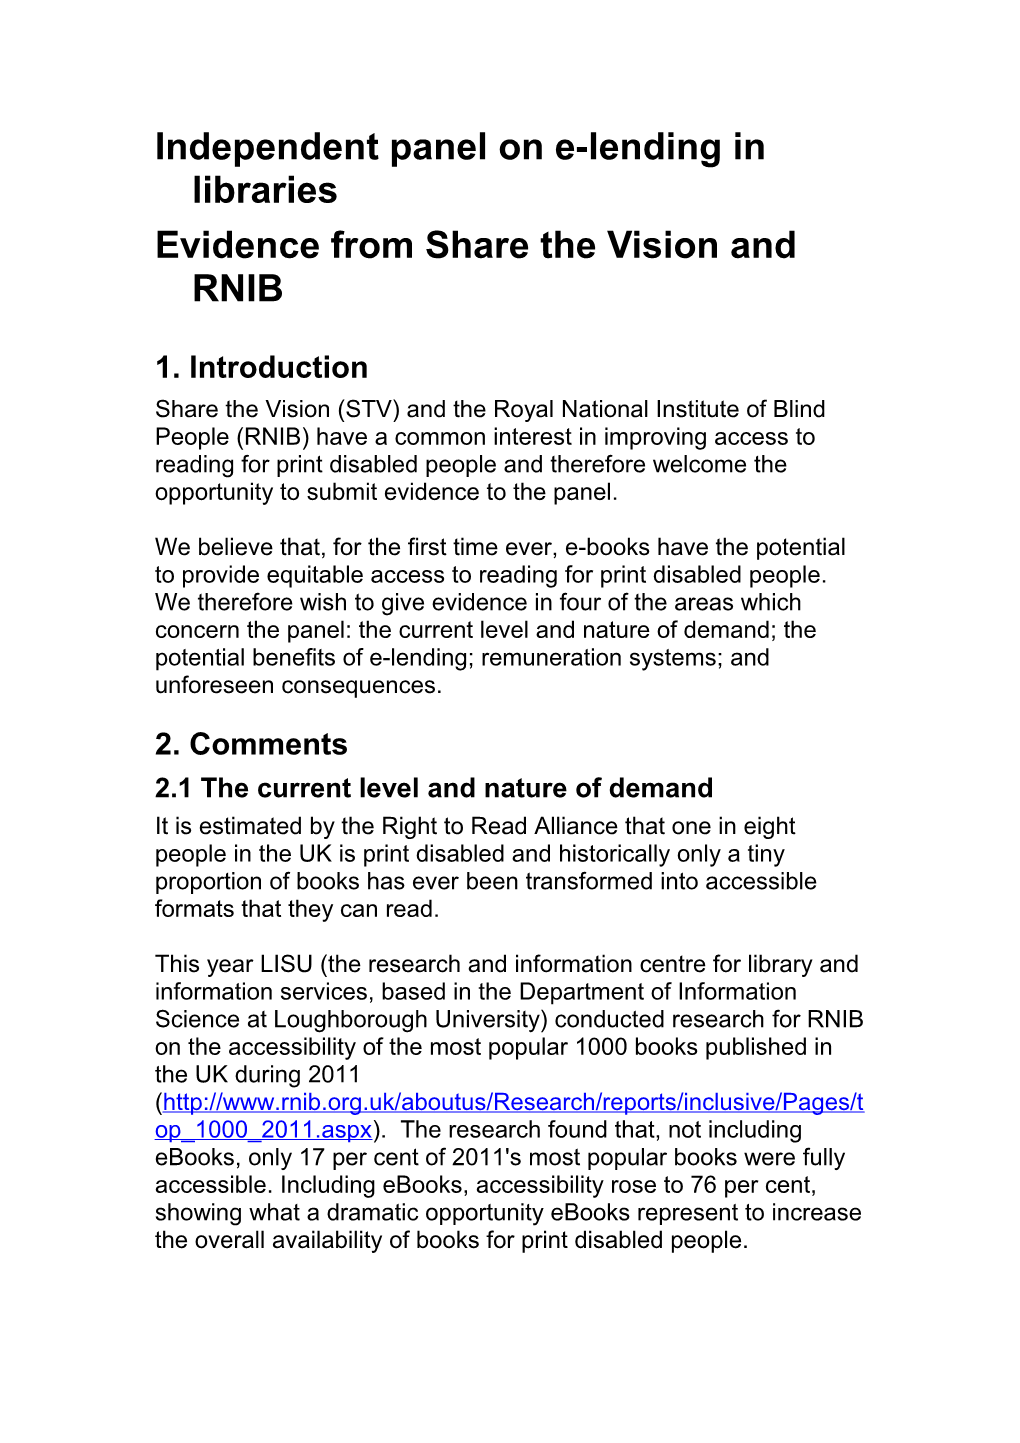 SCL Position on E-Book Lending in Libraries: Feedback from Share the Vision and RNIB